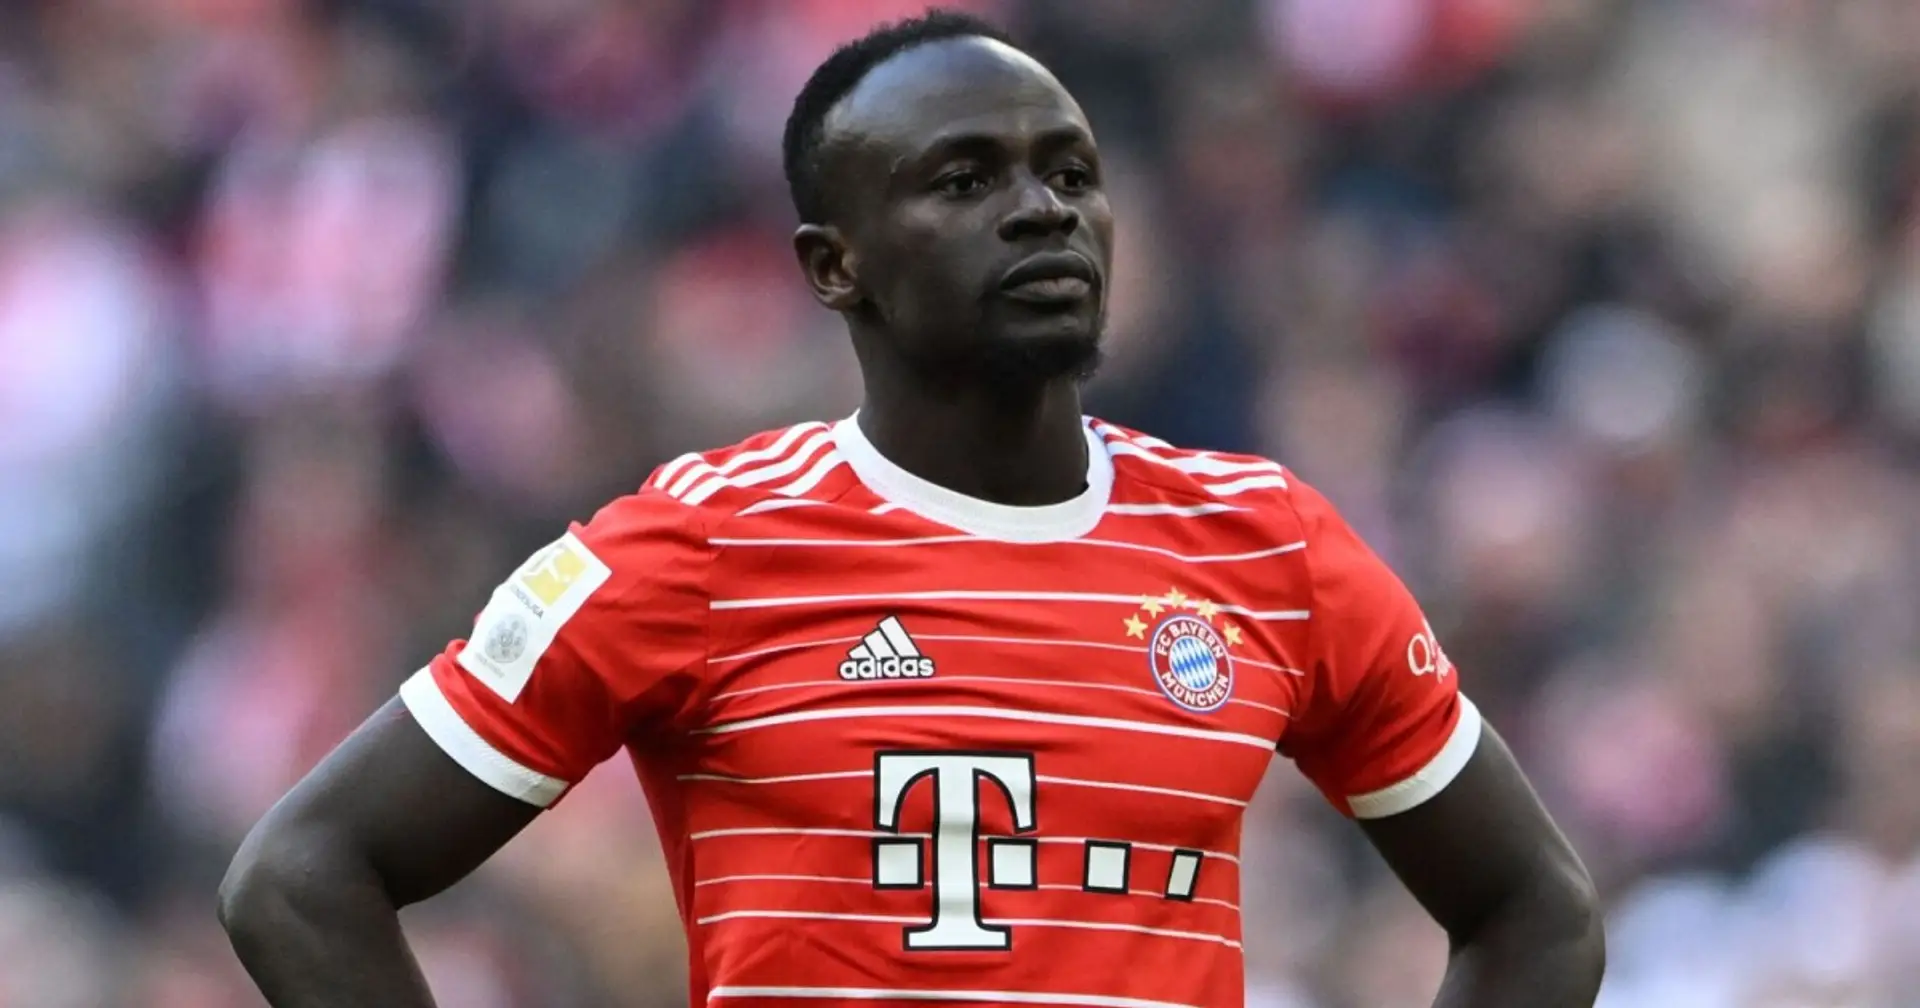 Mane expected to leave Bayern in the summer – journalist explains why Liverpool might not want him back